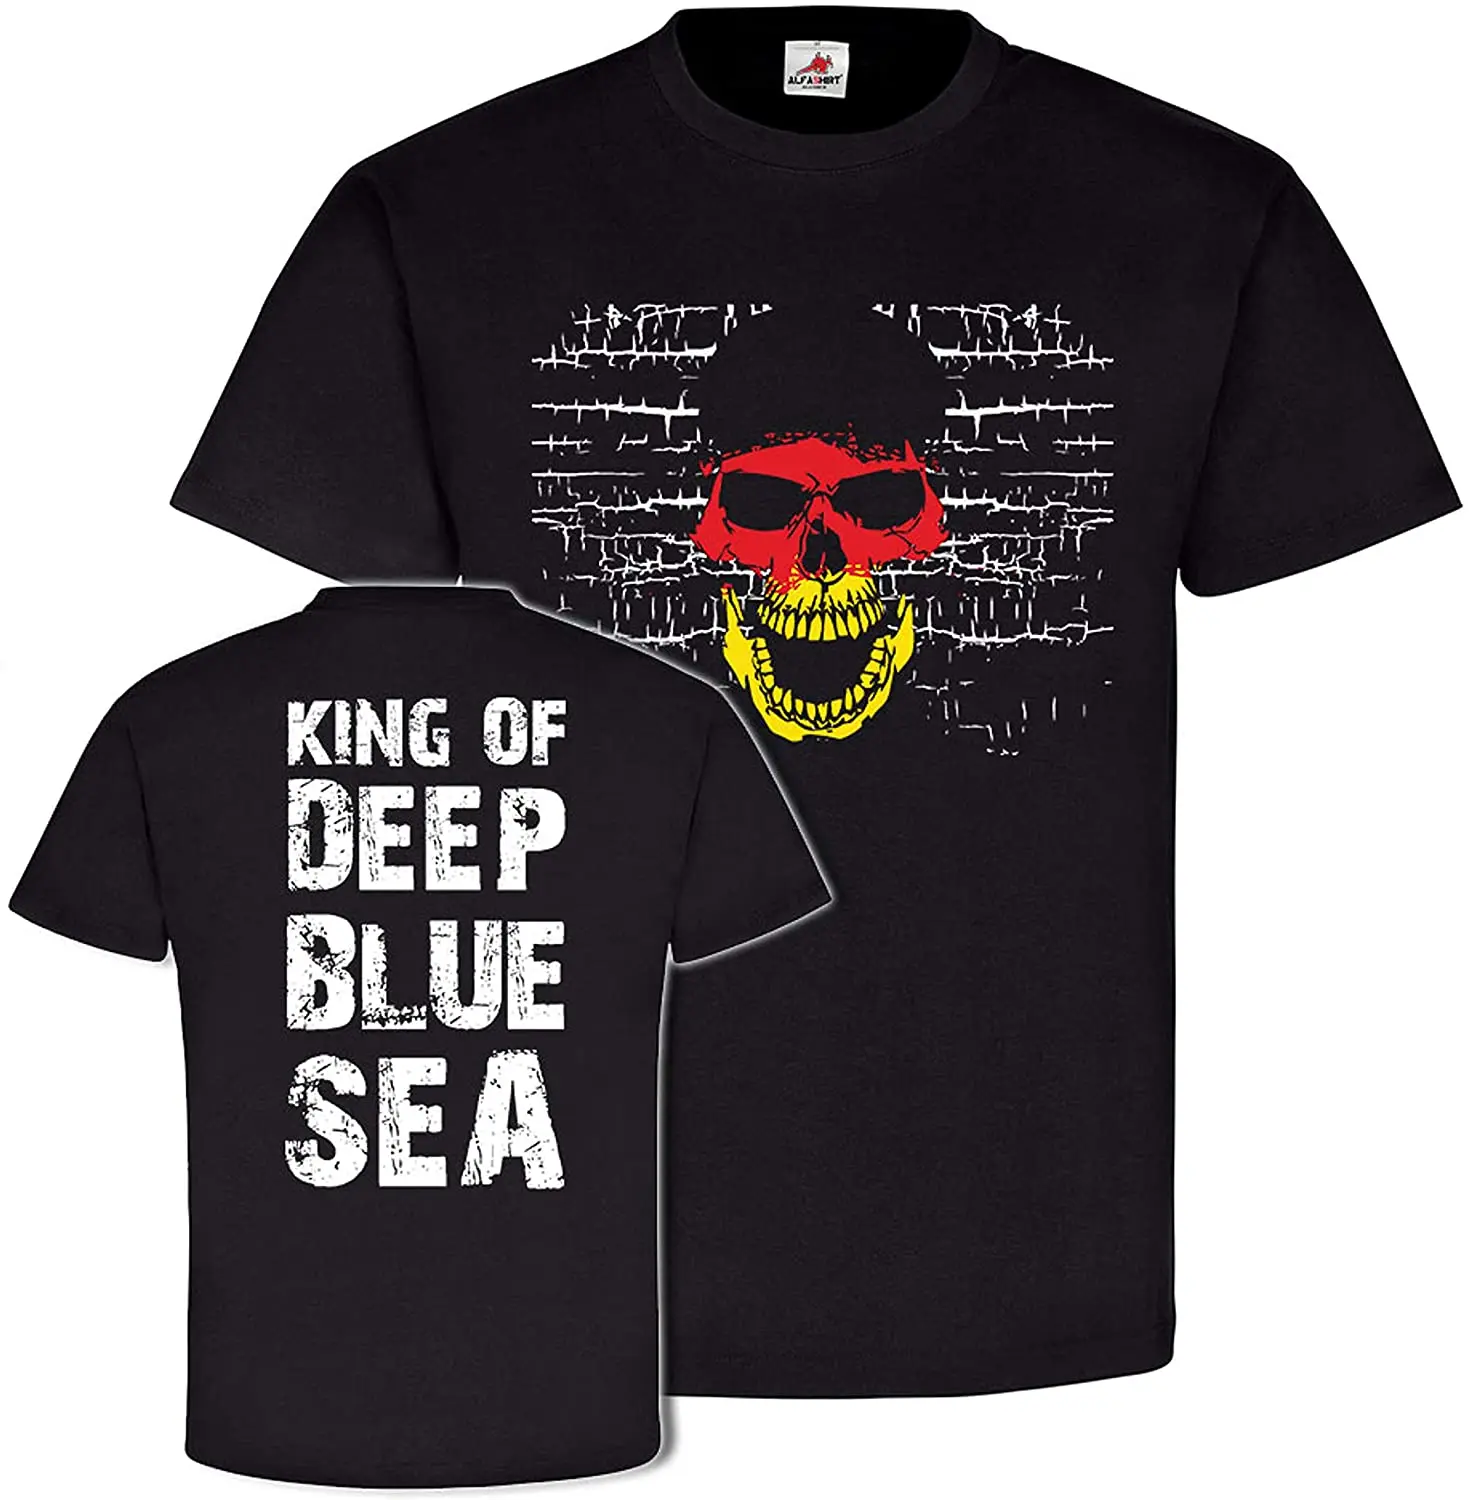 

King of Deep Blue Sea Germany Flag Diver Skull Naval Swimmer Sailor T Shirt. 100% Cotton Casual T-shirts Loose Top Size S-3XL